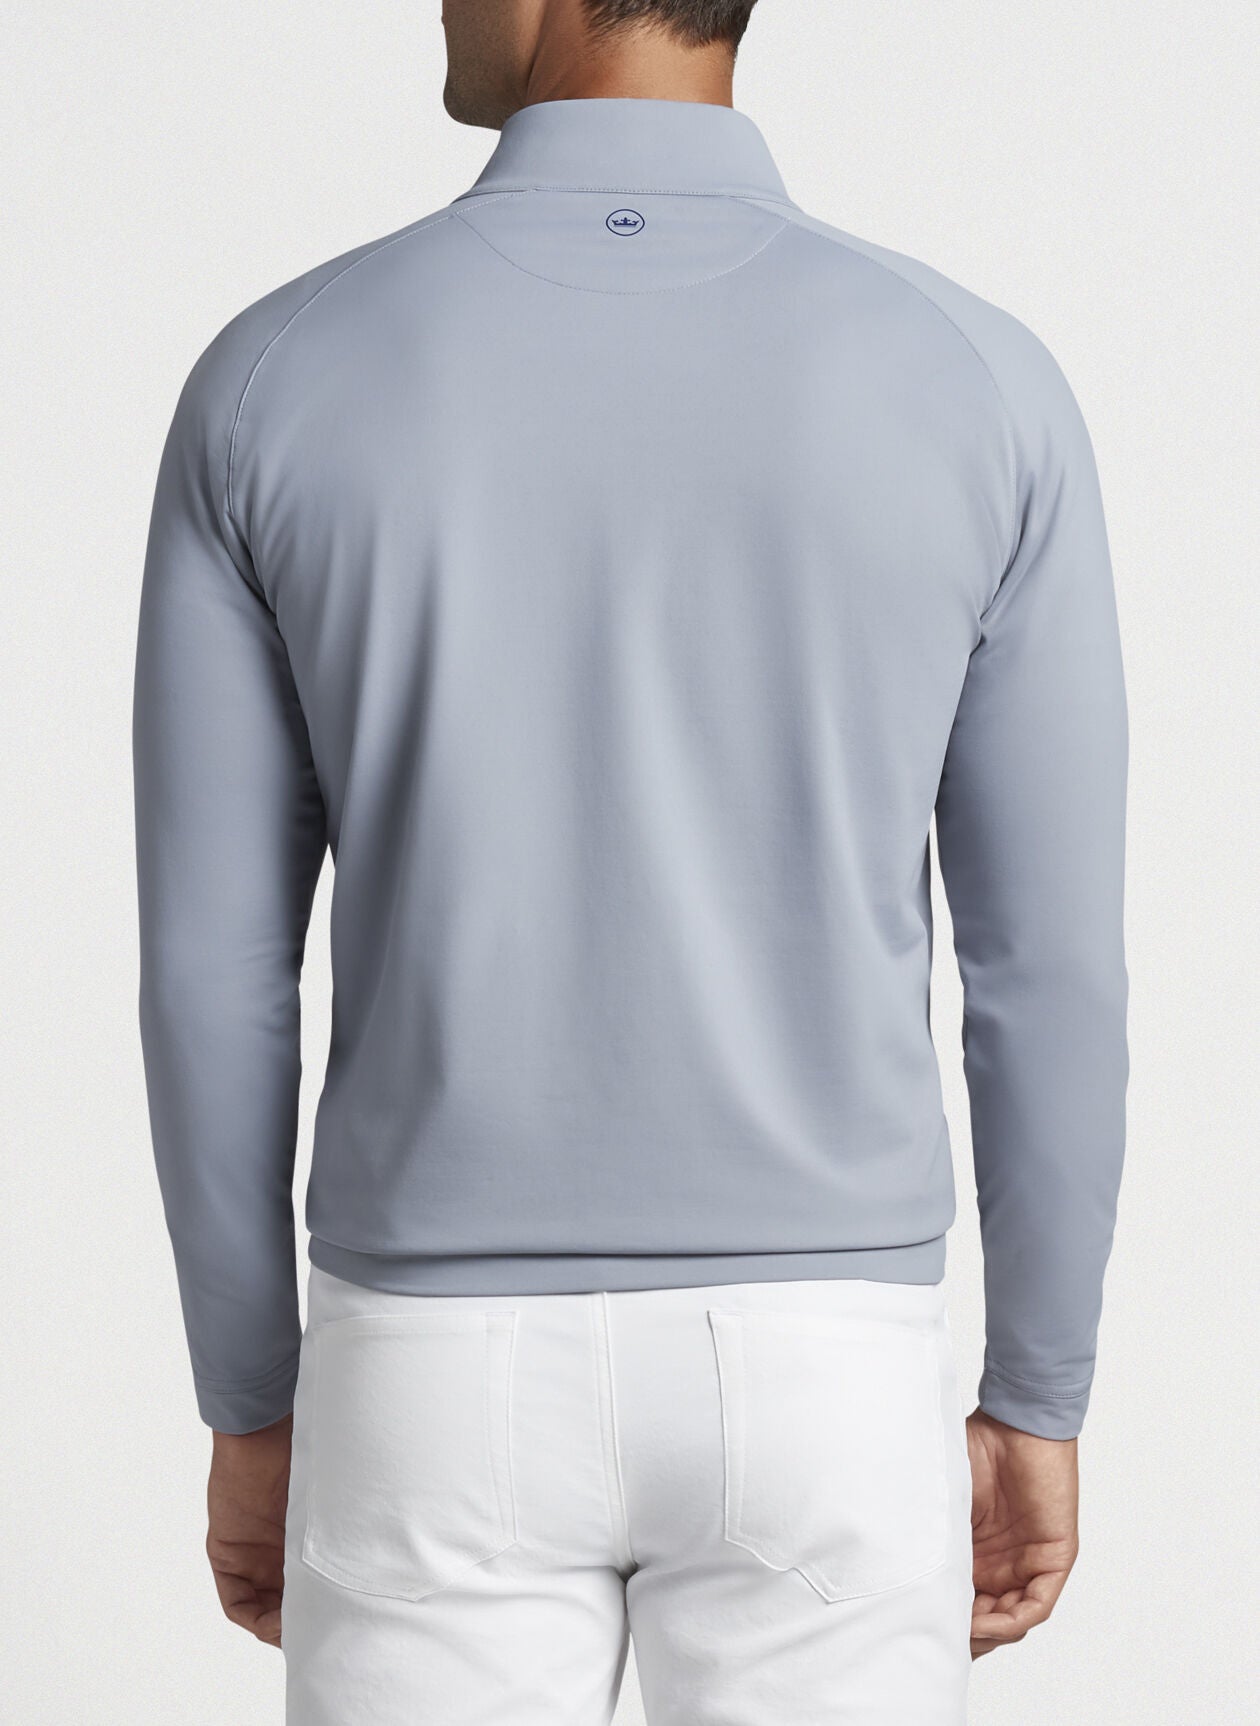 FORGE PERFORMANCE 1/4 ZIP SWEATER - LONDON